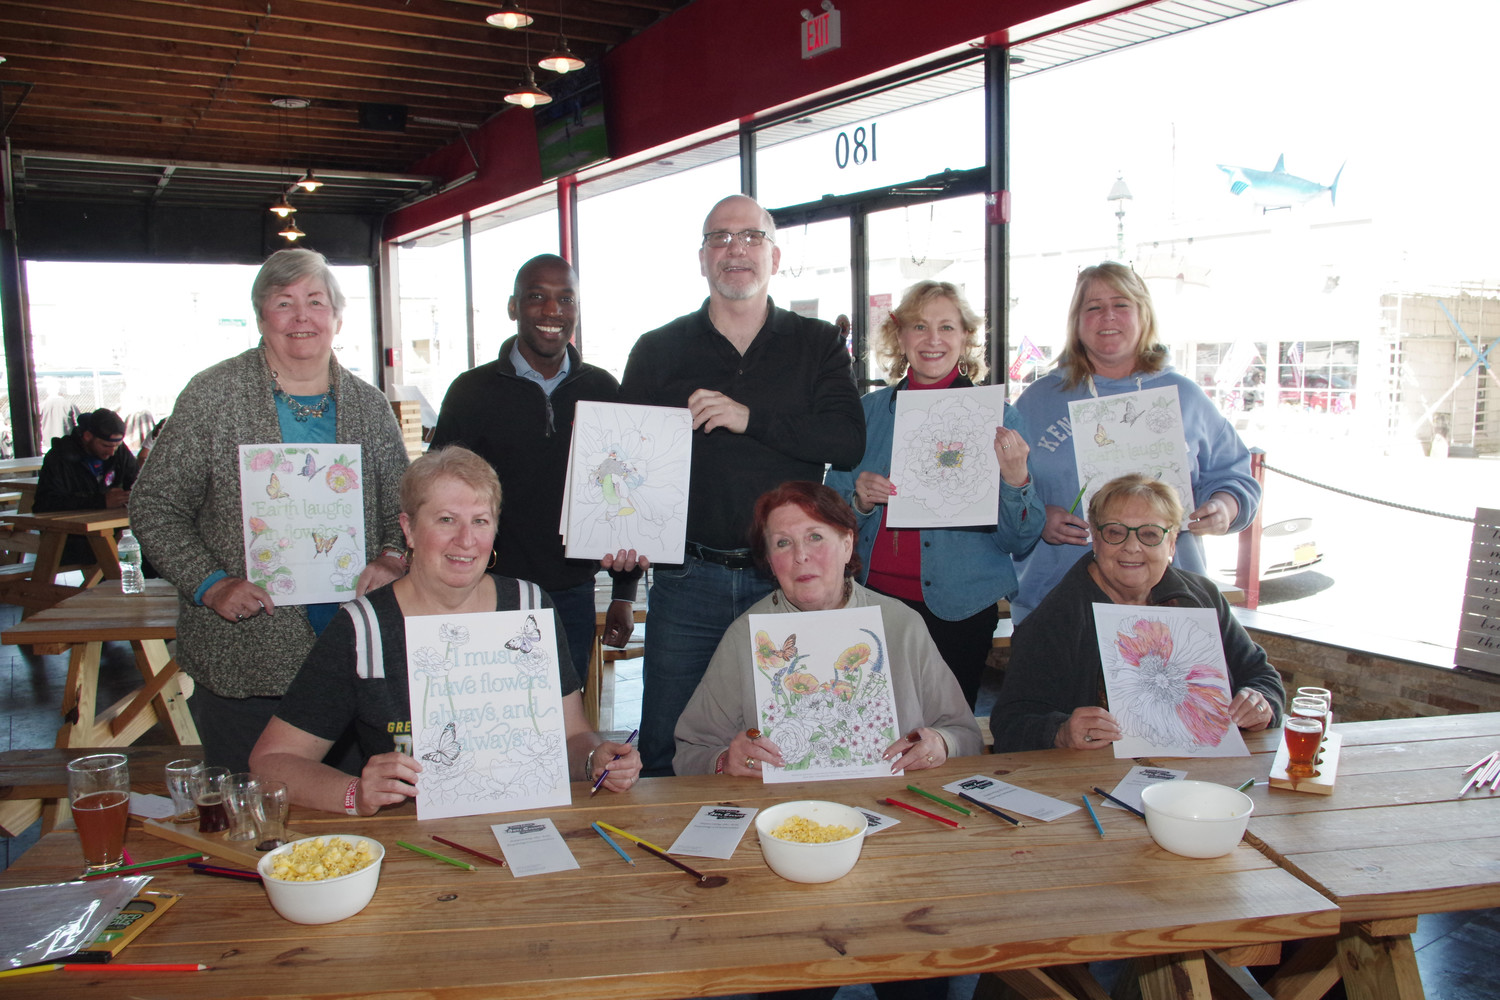 Long Island Arts Council at Freeport showed their finish coloring pages during the fundraiser at the BrewSa Brewery, from left, Janet Gabler, Anthony Miller, Larry Dresner, Michelle Berger, Sharon Gabler, Diane Stratton, Lois Howes and Mirelli Taub.